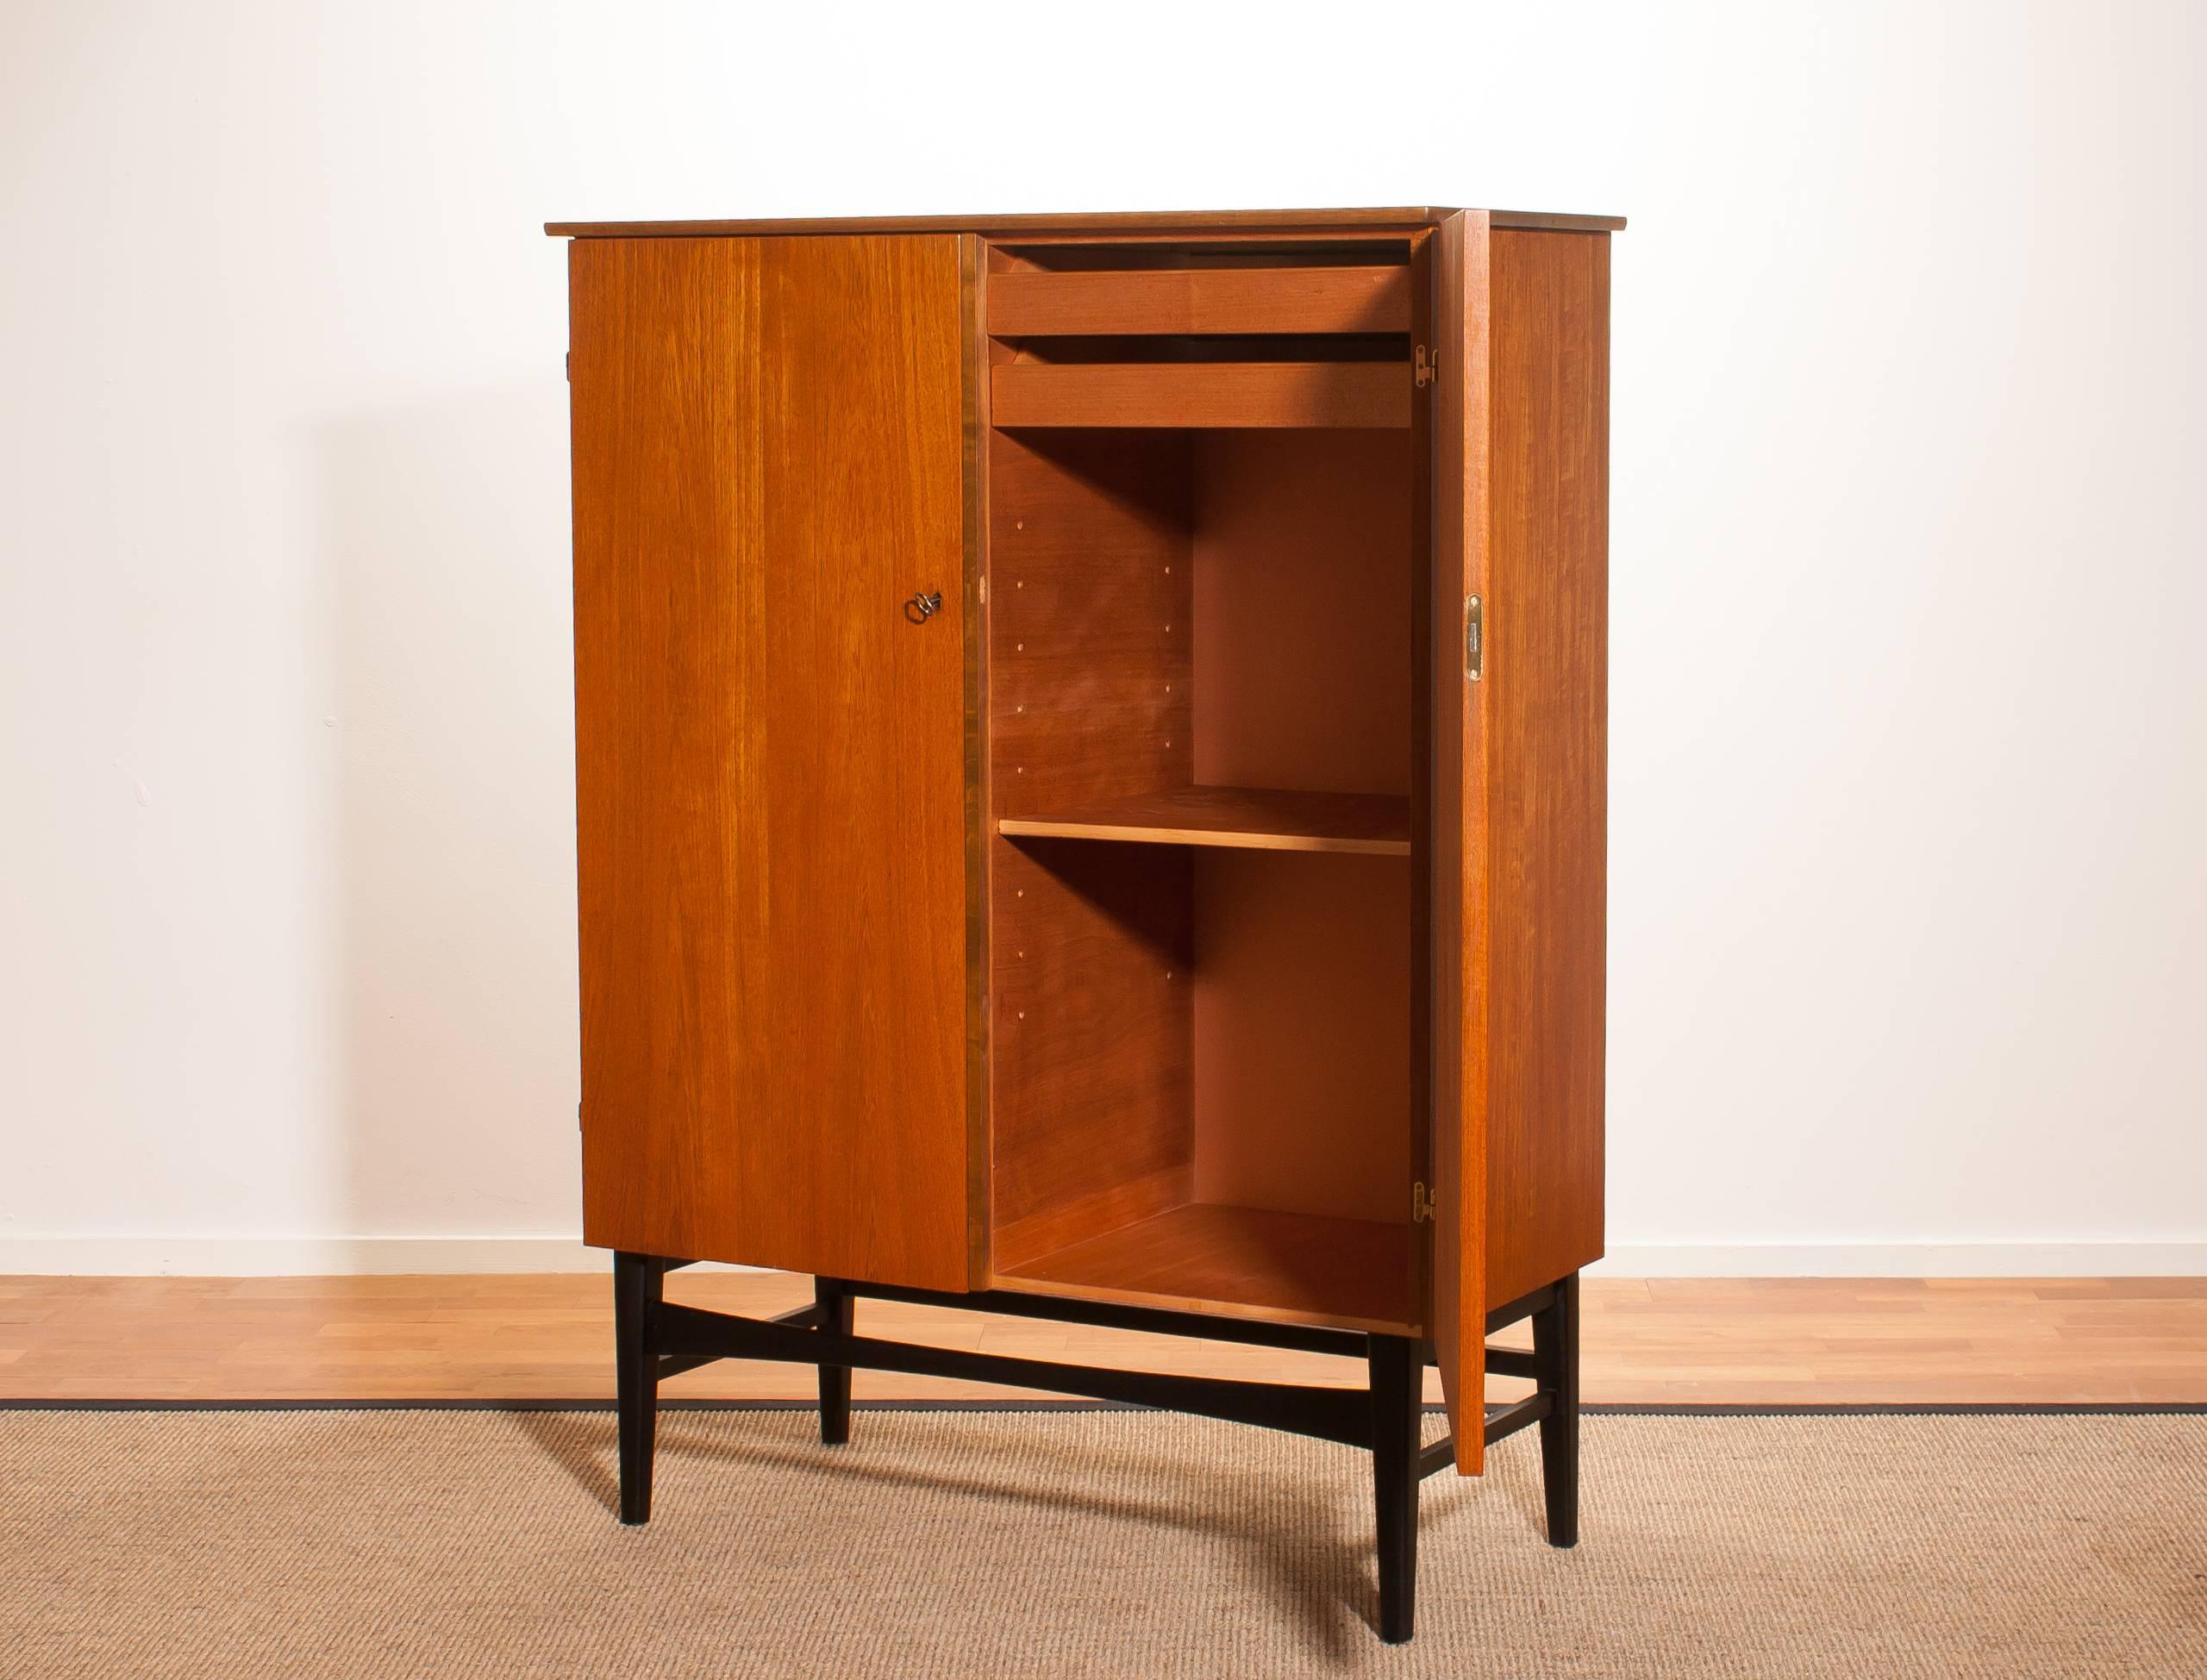 Very nice cabinet made in Sweden.
This cabinet is made of teak and beech.
It is in a nice condition.
Period 1950s
Dimensions: H.135 cm, W.100 cm, D.45 cm.